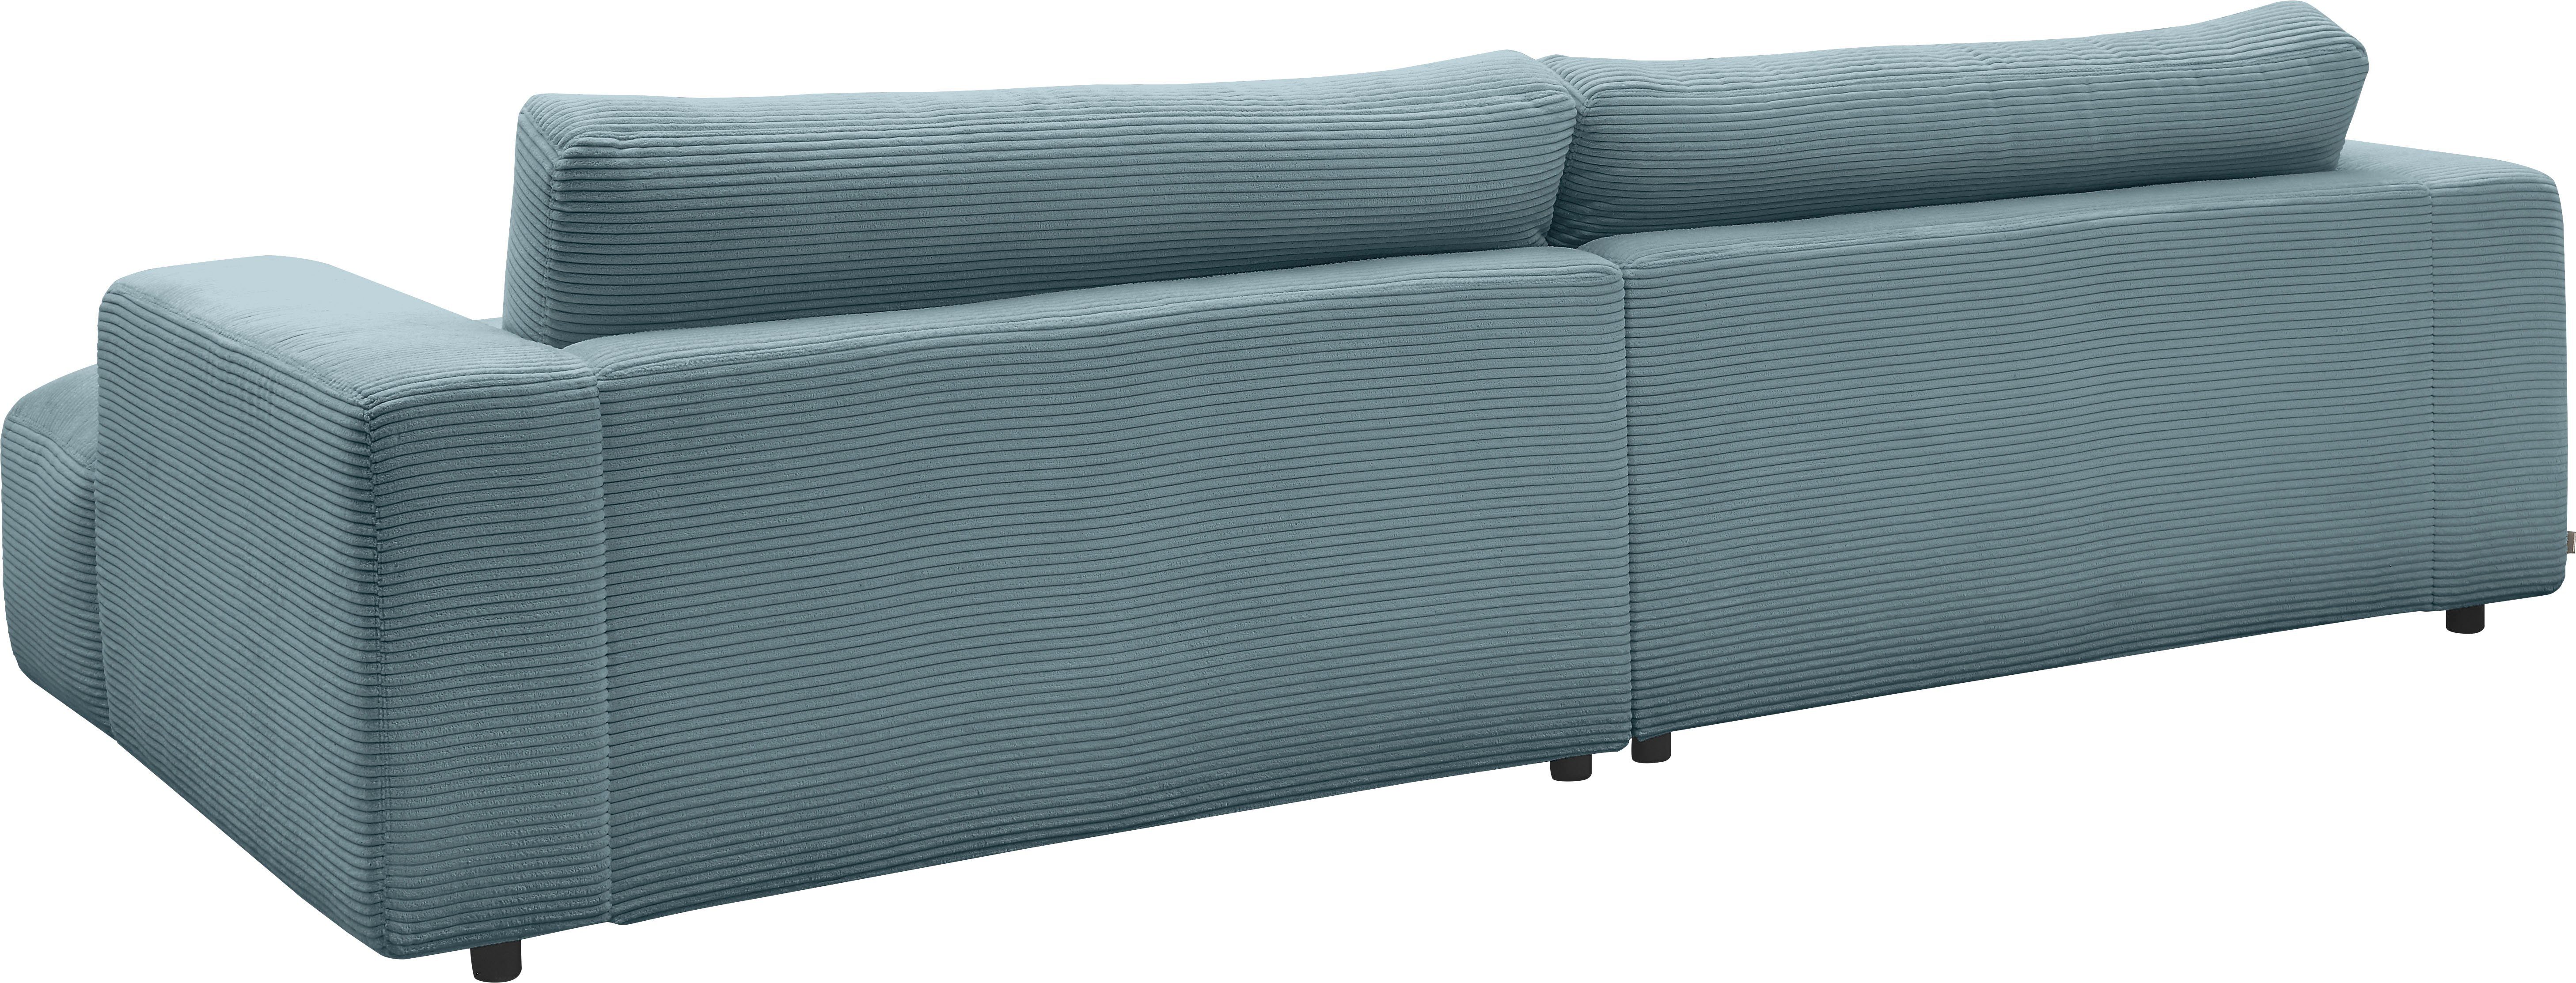 by Cord-Bezug, Lucia, M branded 292 Breite cm Loungesofa petrol GALLERY Musterring